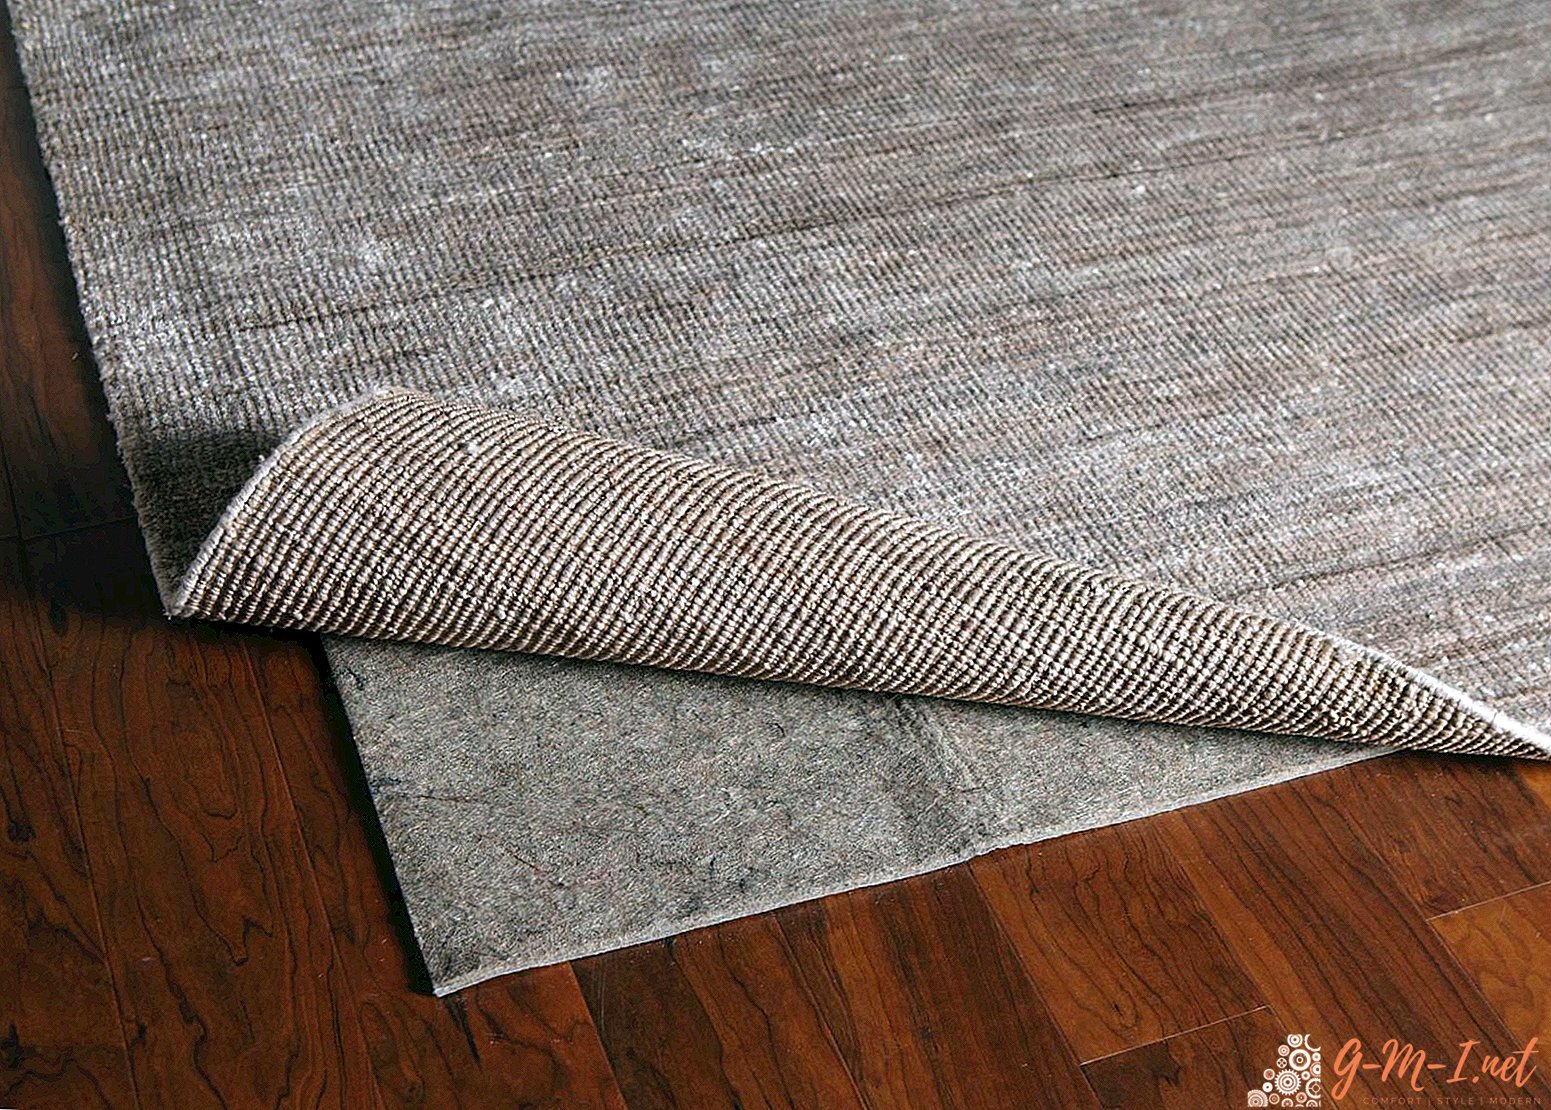 How to lay a carpet on a wooden floor